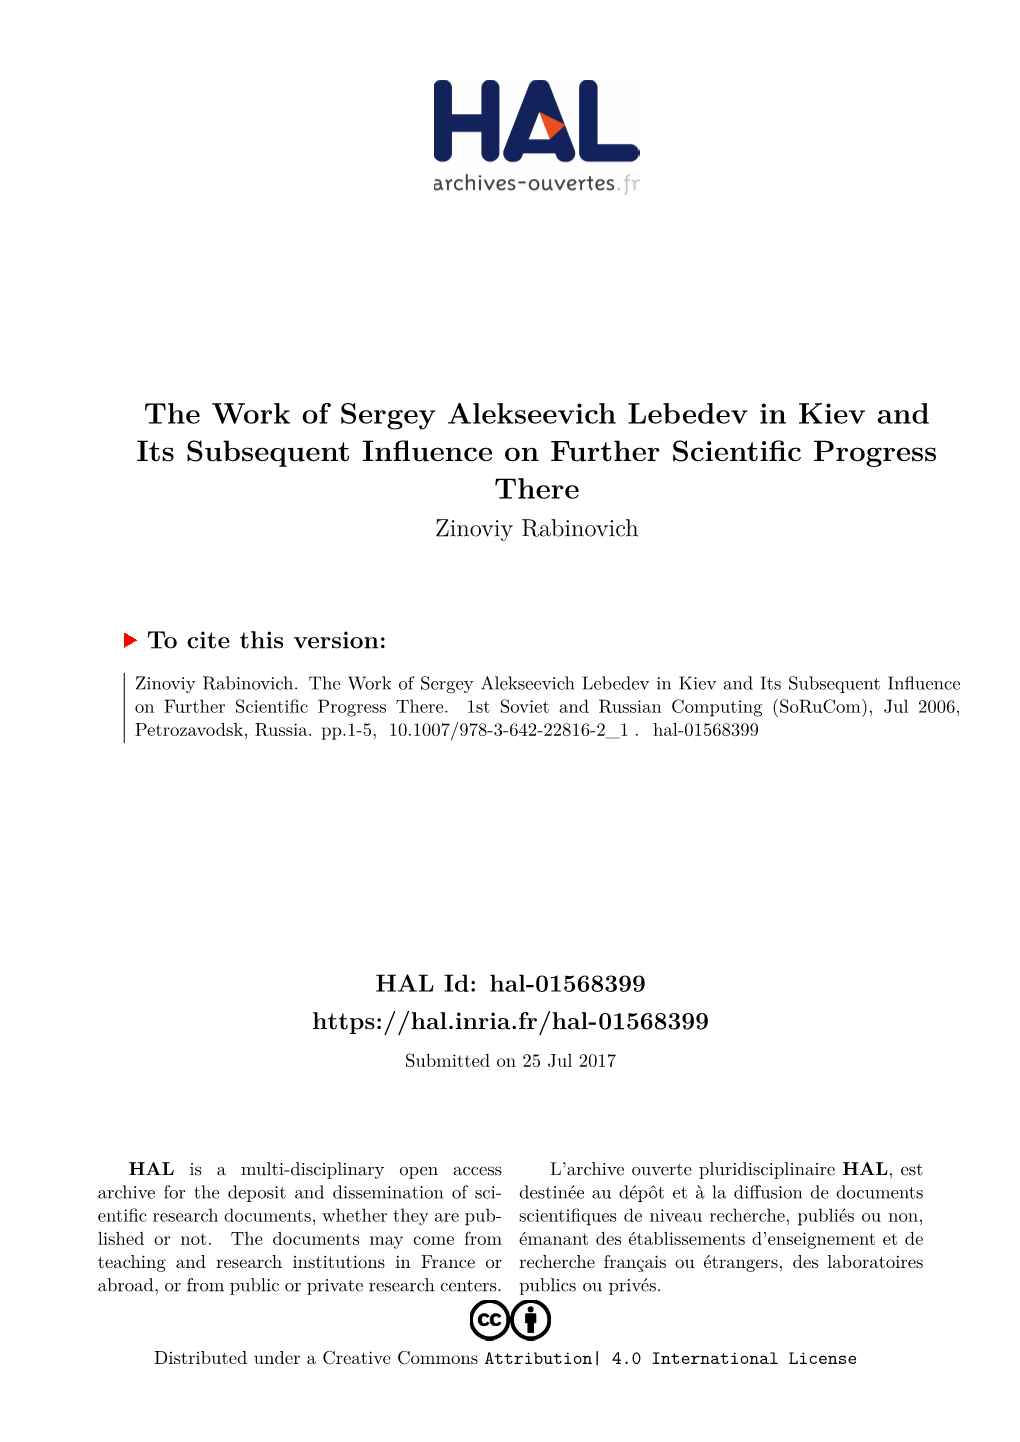 The Work of Sergey Alekseevich Lebedev in Kiev and Its Subsequent Influence on Further Scientific Progress There Zinoviy Rabinovich